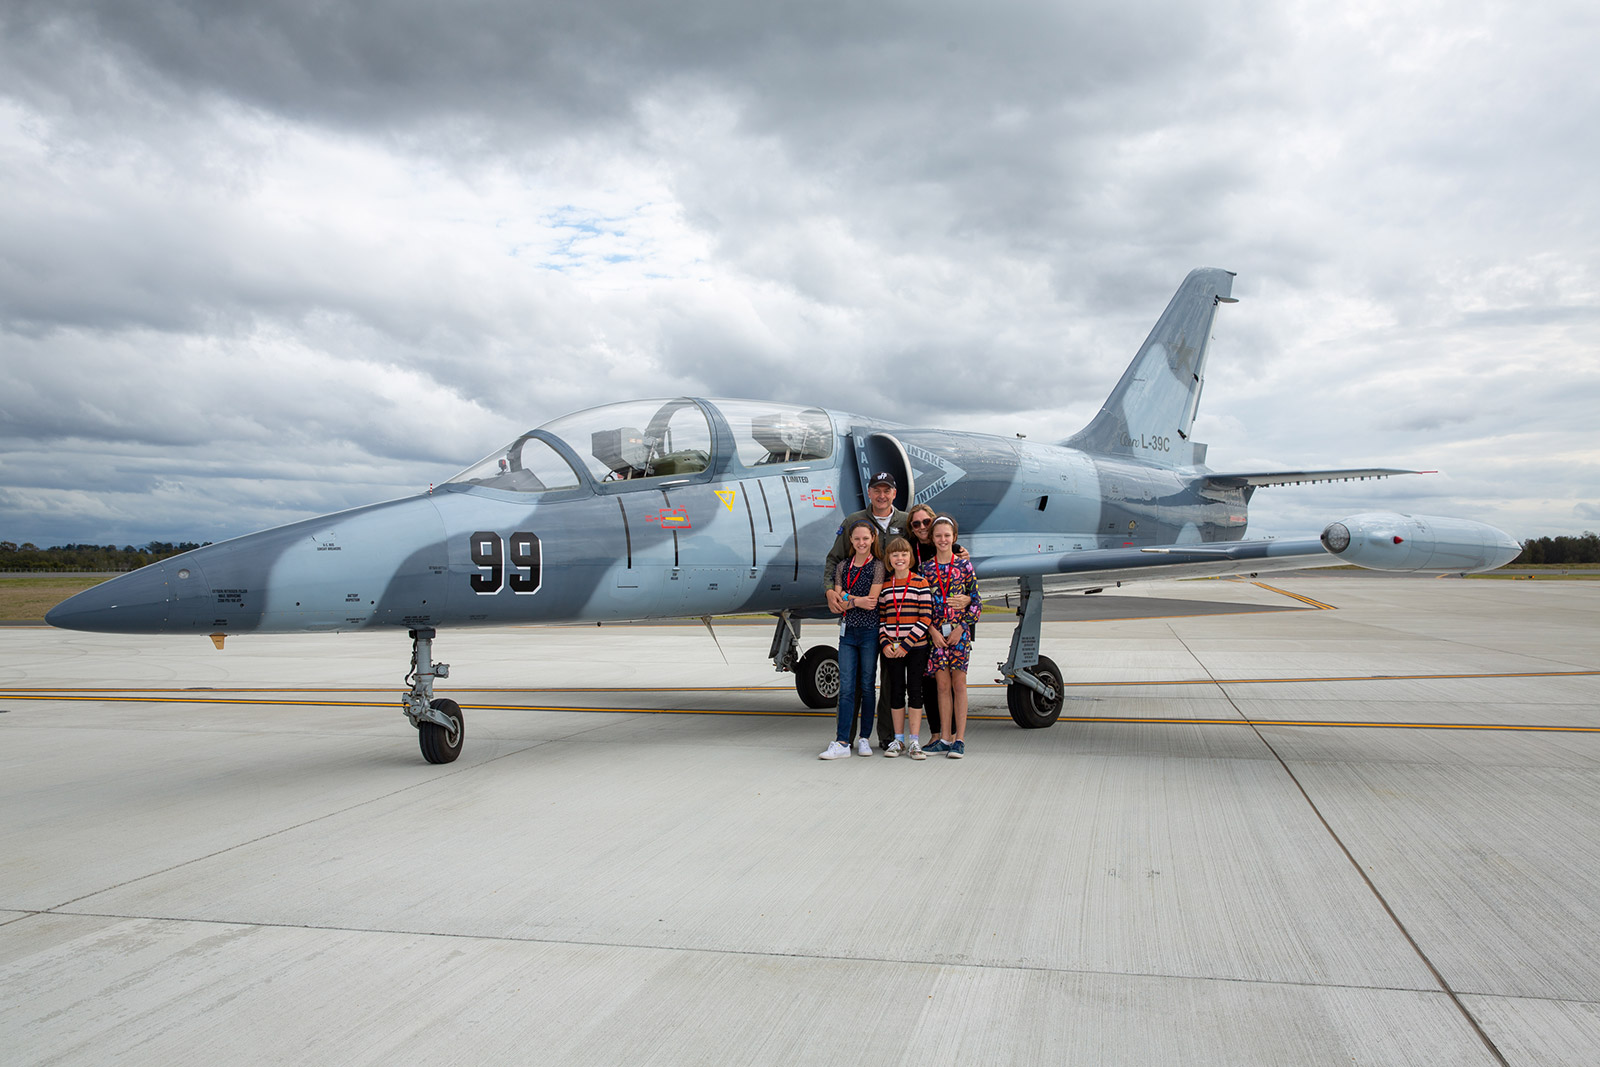 Steve Boyd, pictured here with his wife and daughters, has more than 33 years of aviation experience 